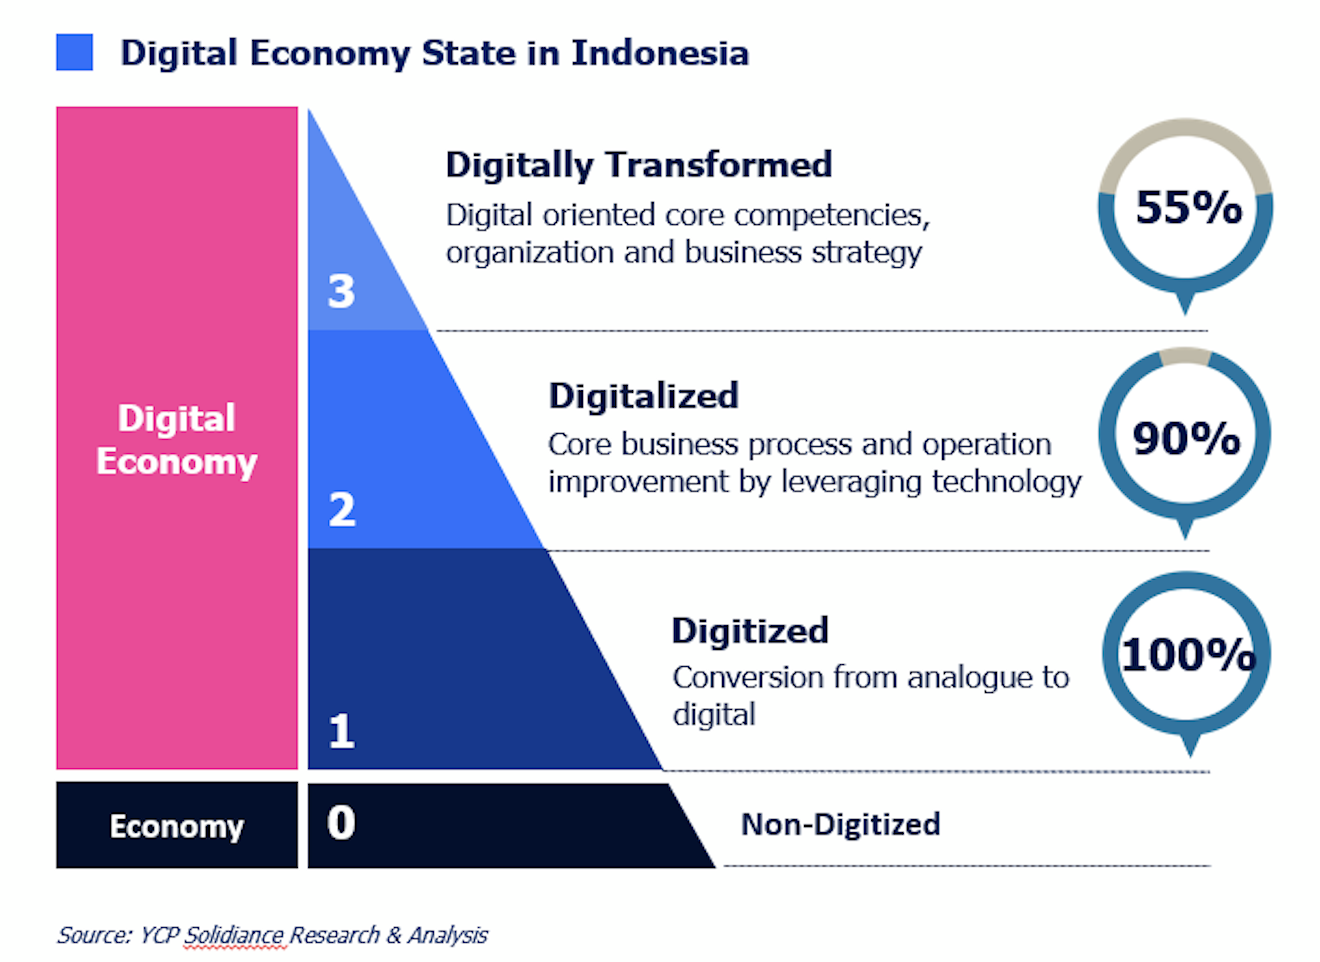 A infographic showing the state of digital economy in Indonesia.